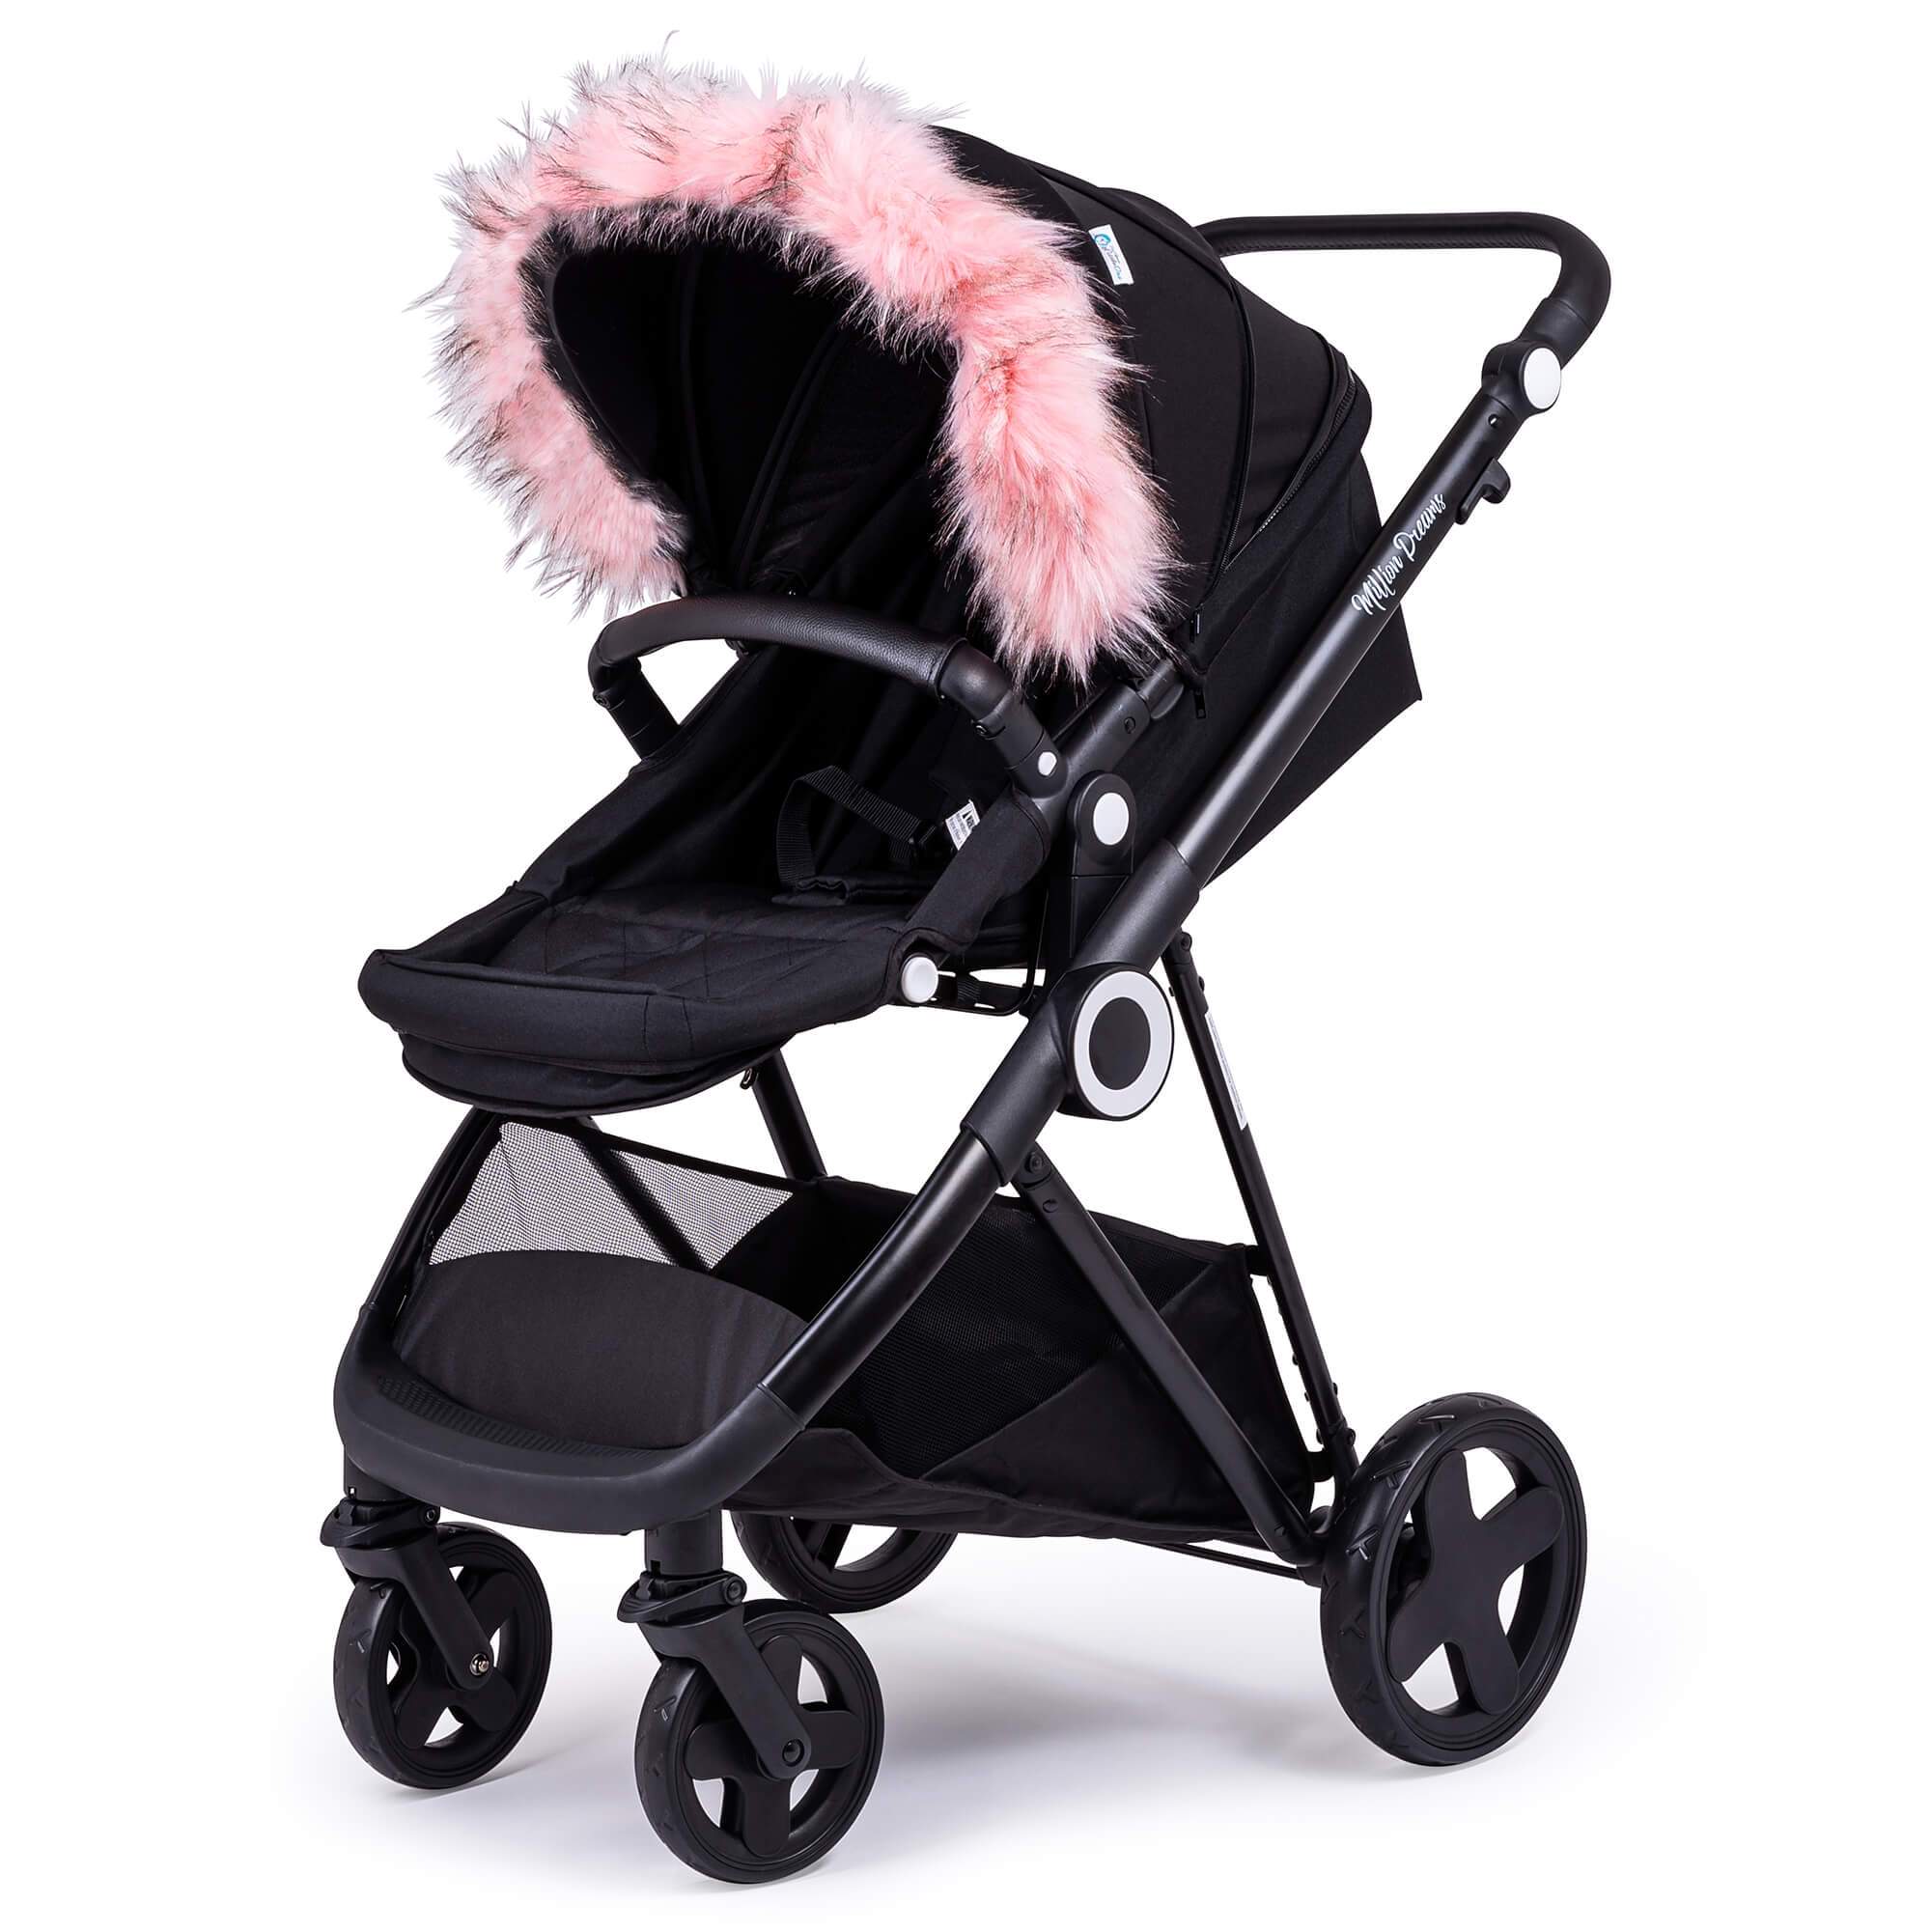 Pram Fur Hood Trim Attachment for Pushchair Compatible with Babybus - Light Pink / Fits All Models | For Your Little One